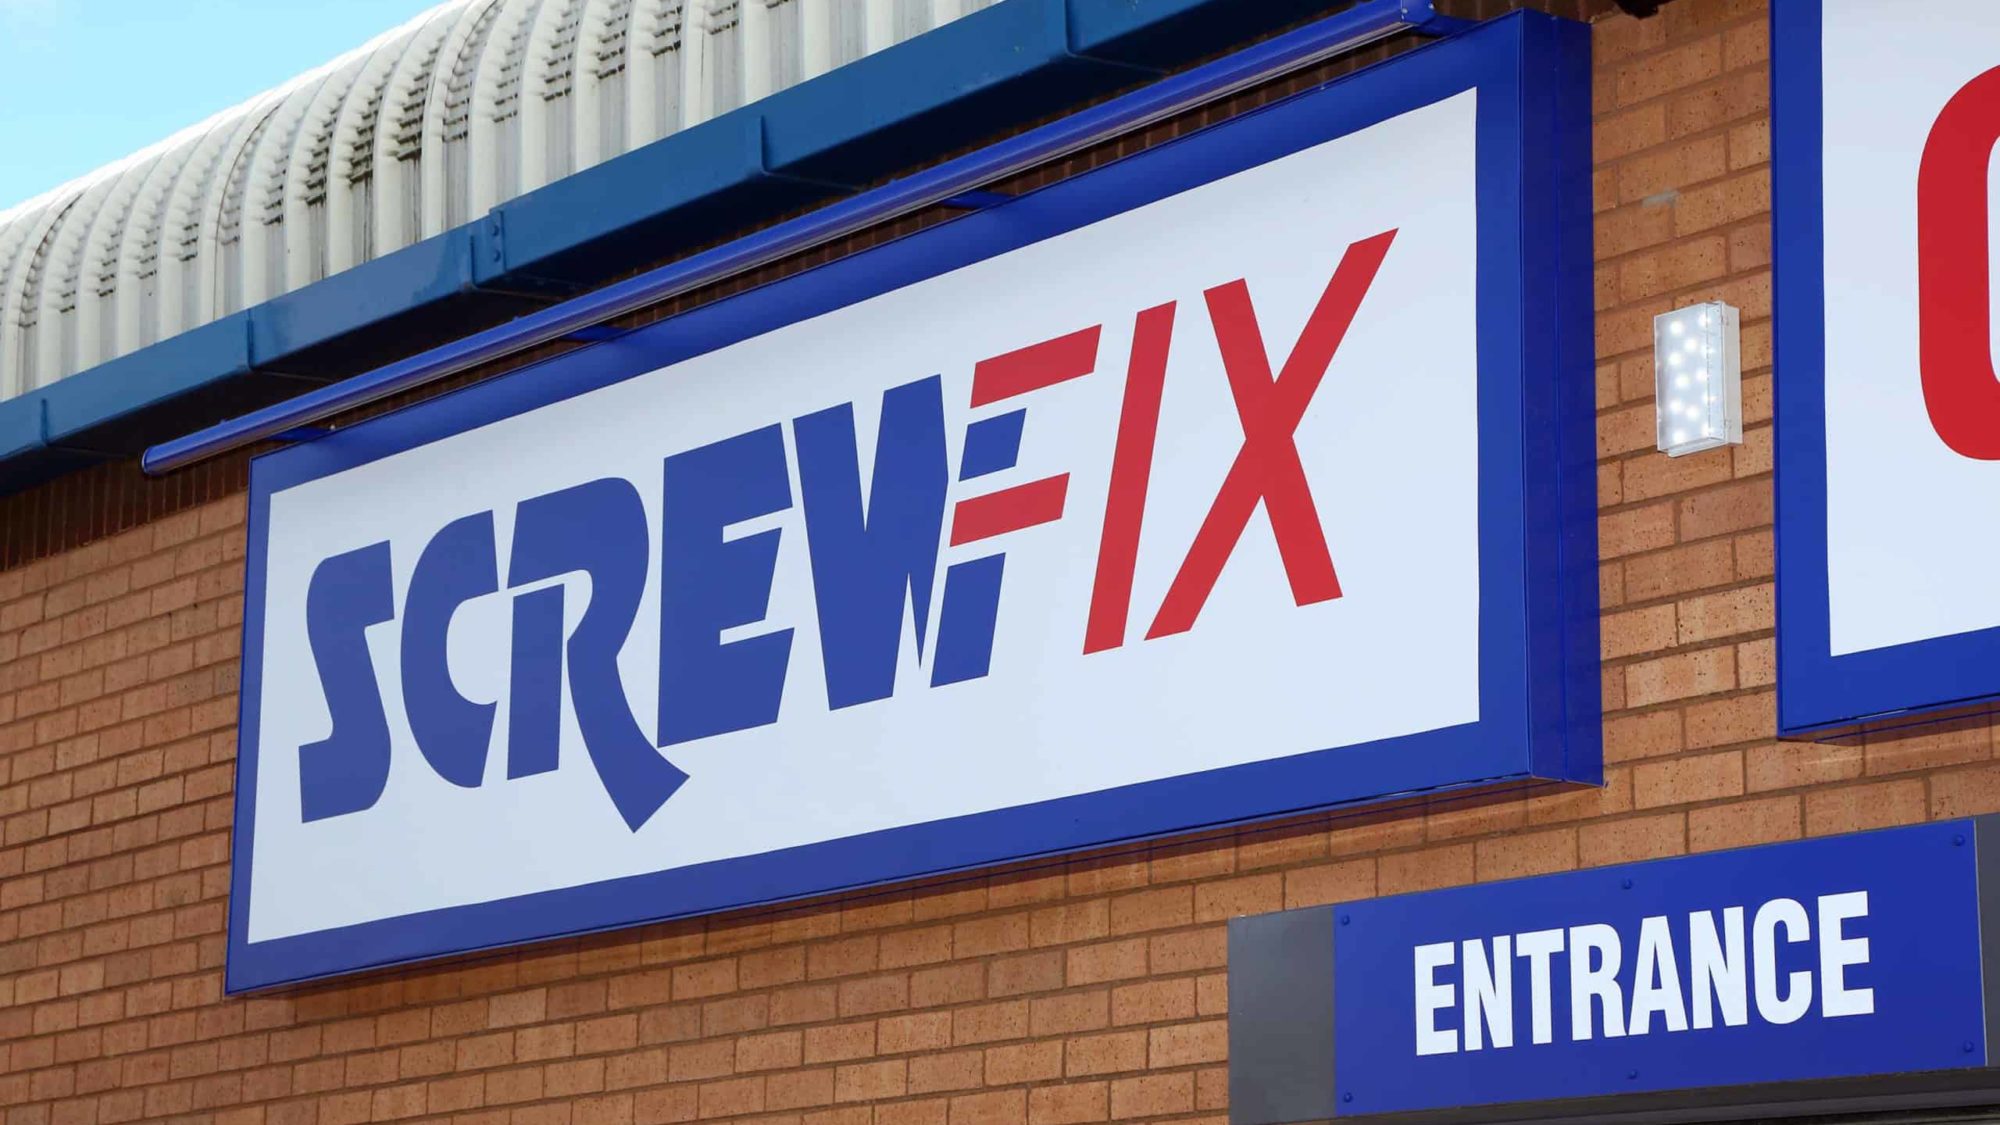 Screwfix grows sales to £2bn